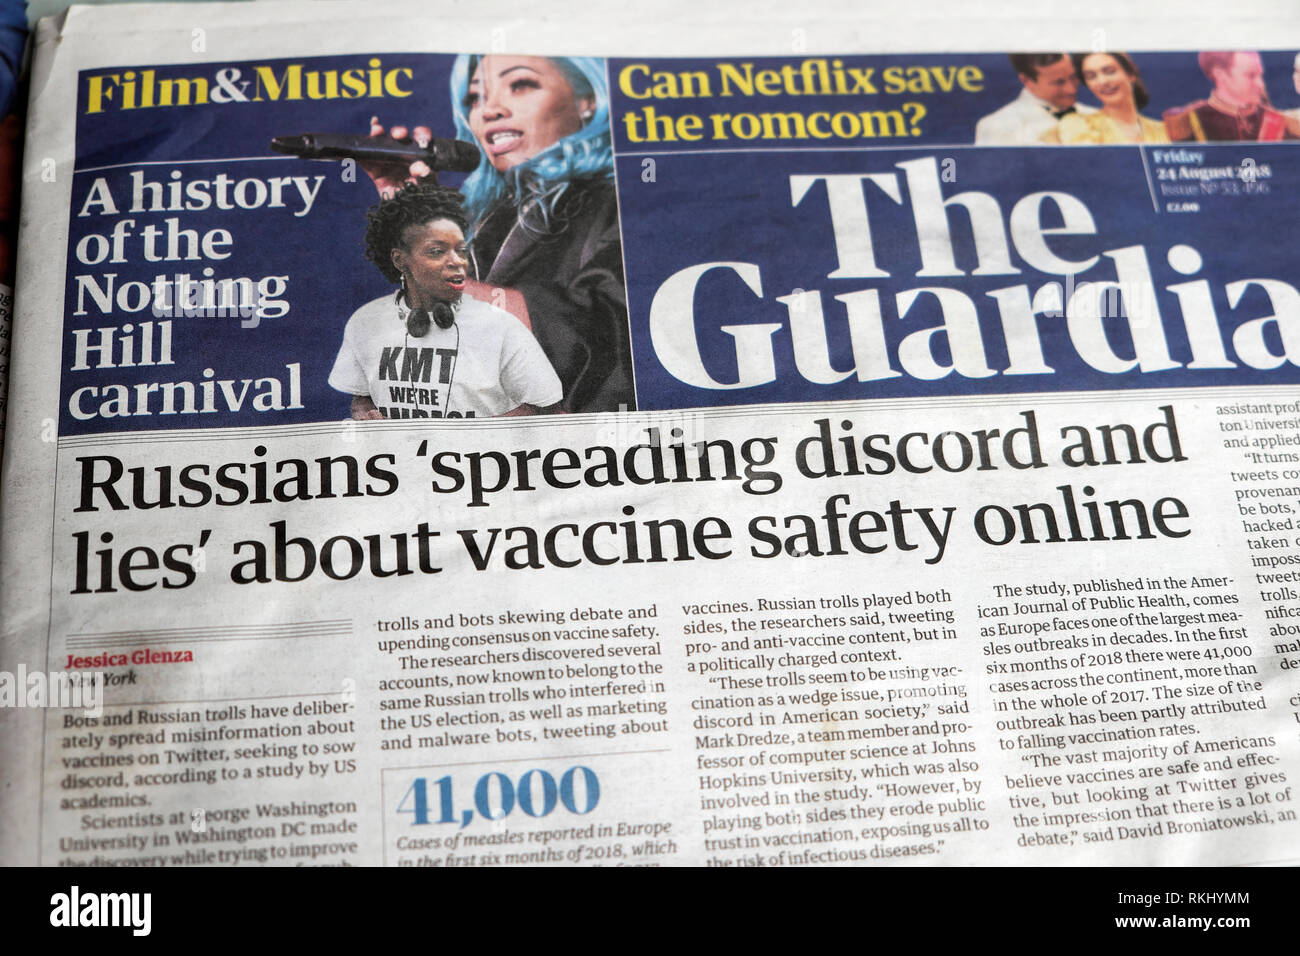 'Russians 'spreading discord and lies' about vaccine safety online' front page headline in the Guardian newspaper August 2018 London UK Stock Photo